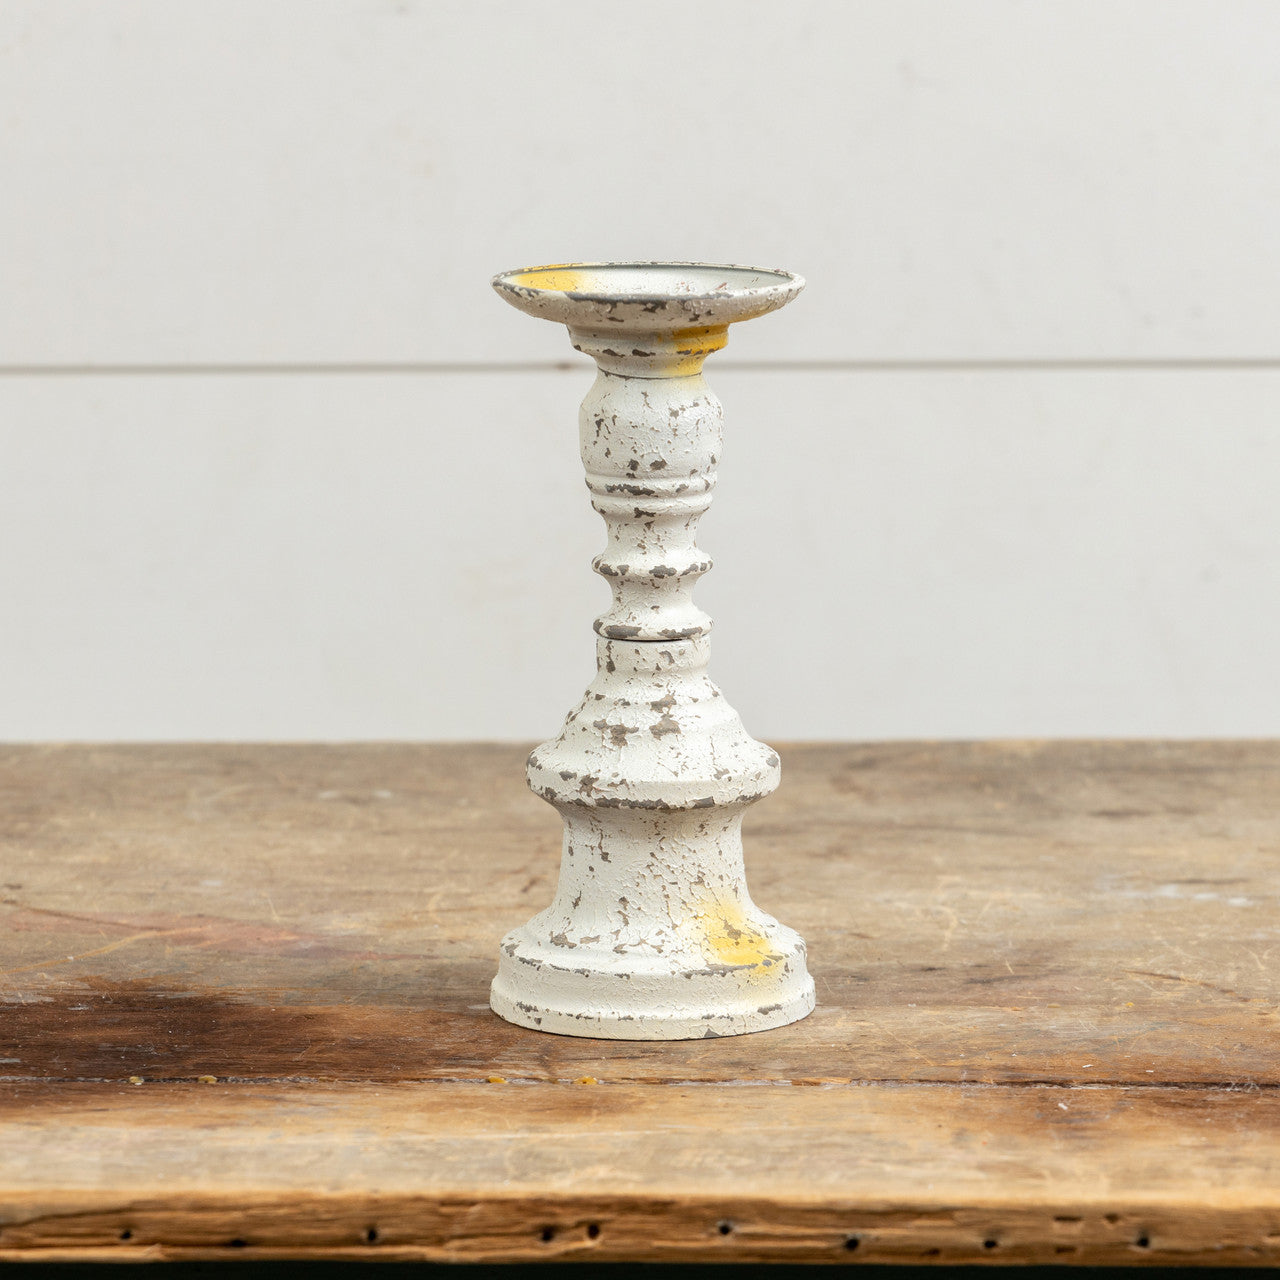 White Candle stick, great accent for any home. Add this to a mantel, shelf or dinning table to add that vintage look. W: 4" H: 8.75" Candle stick is 8.75" tall *this listing is for 1 candle stick only all other decor and candles are not included8.75" Aged